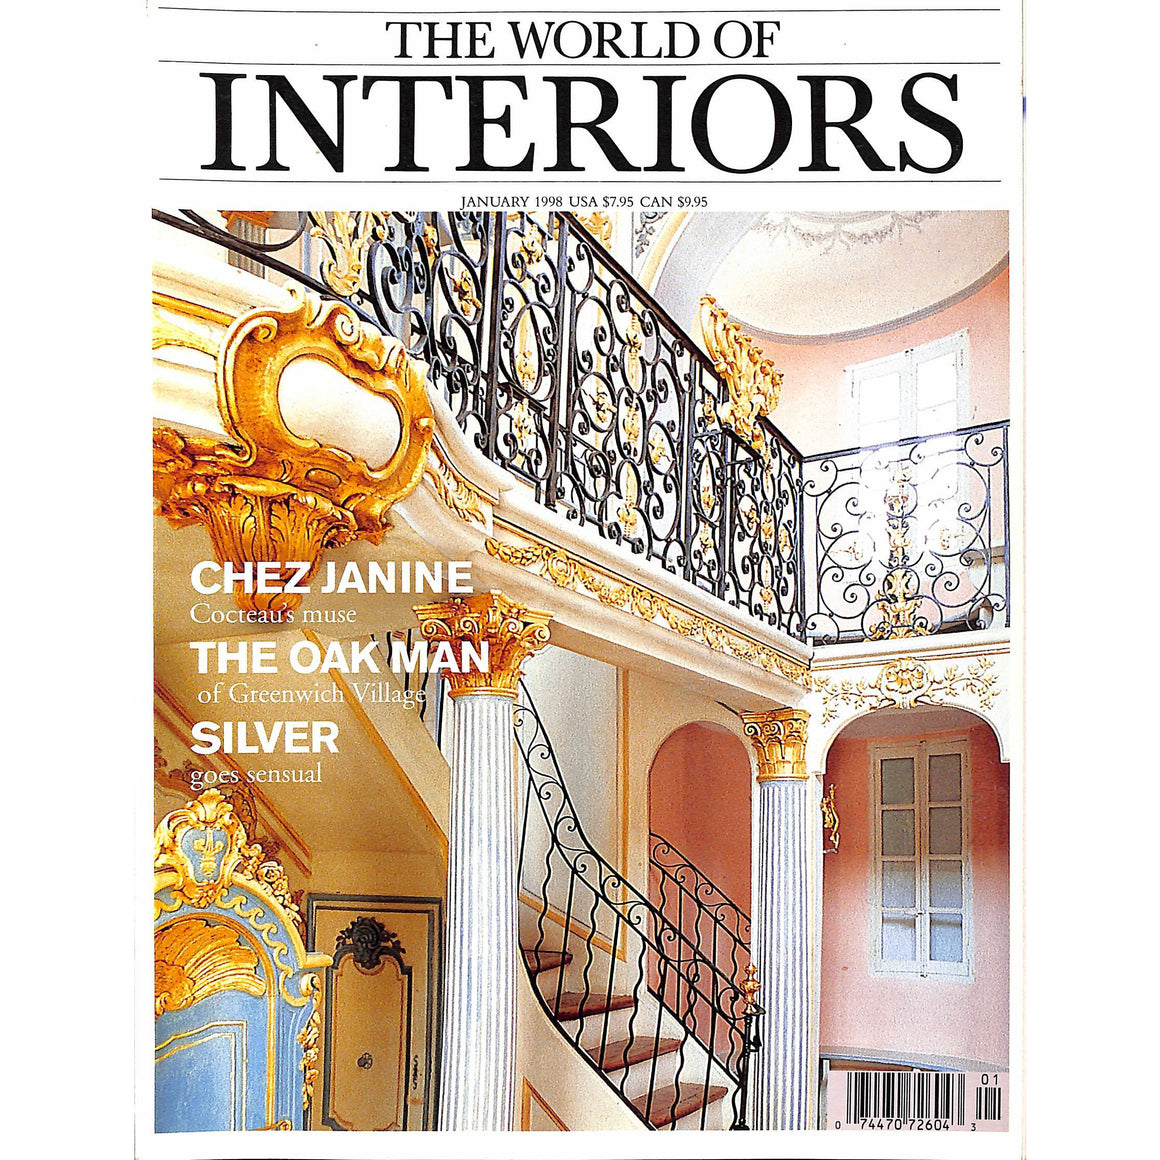 The World Of Interiors January 1998 (SOLD)